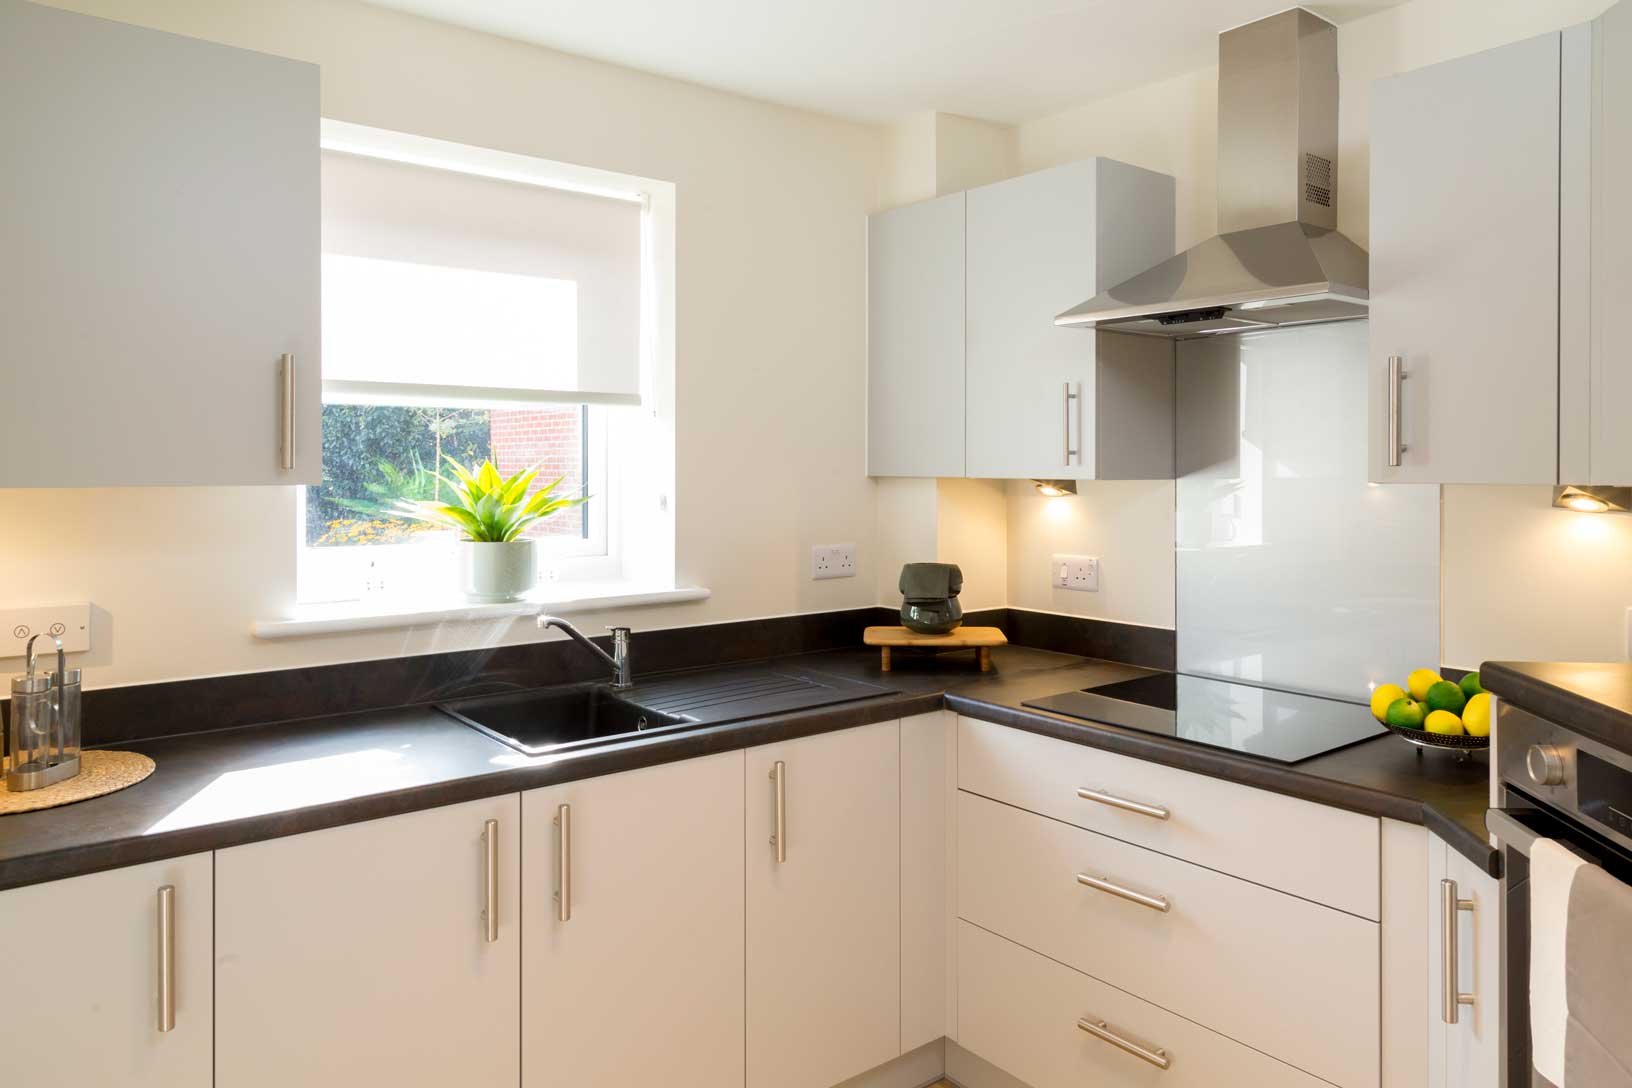 A modern kitchen with white storage cupboards, a window with a garden view and electric stove for safety.